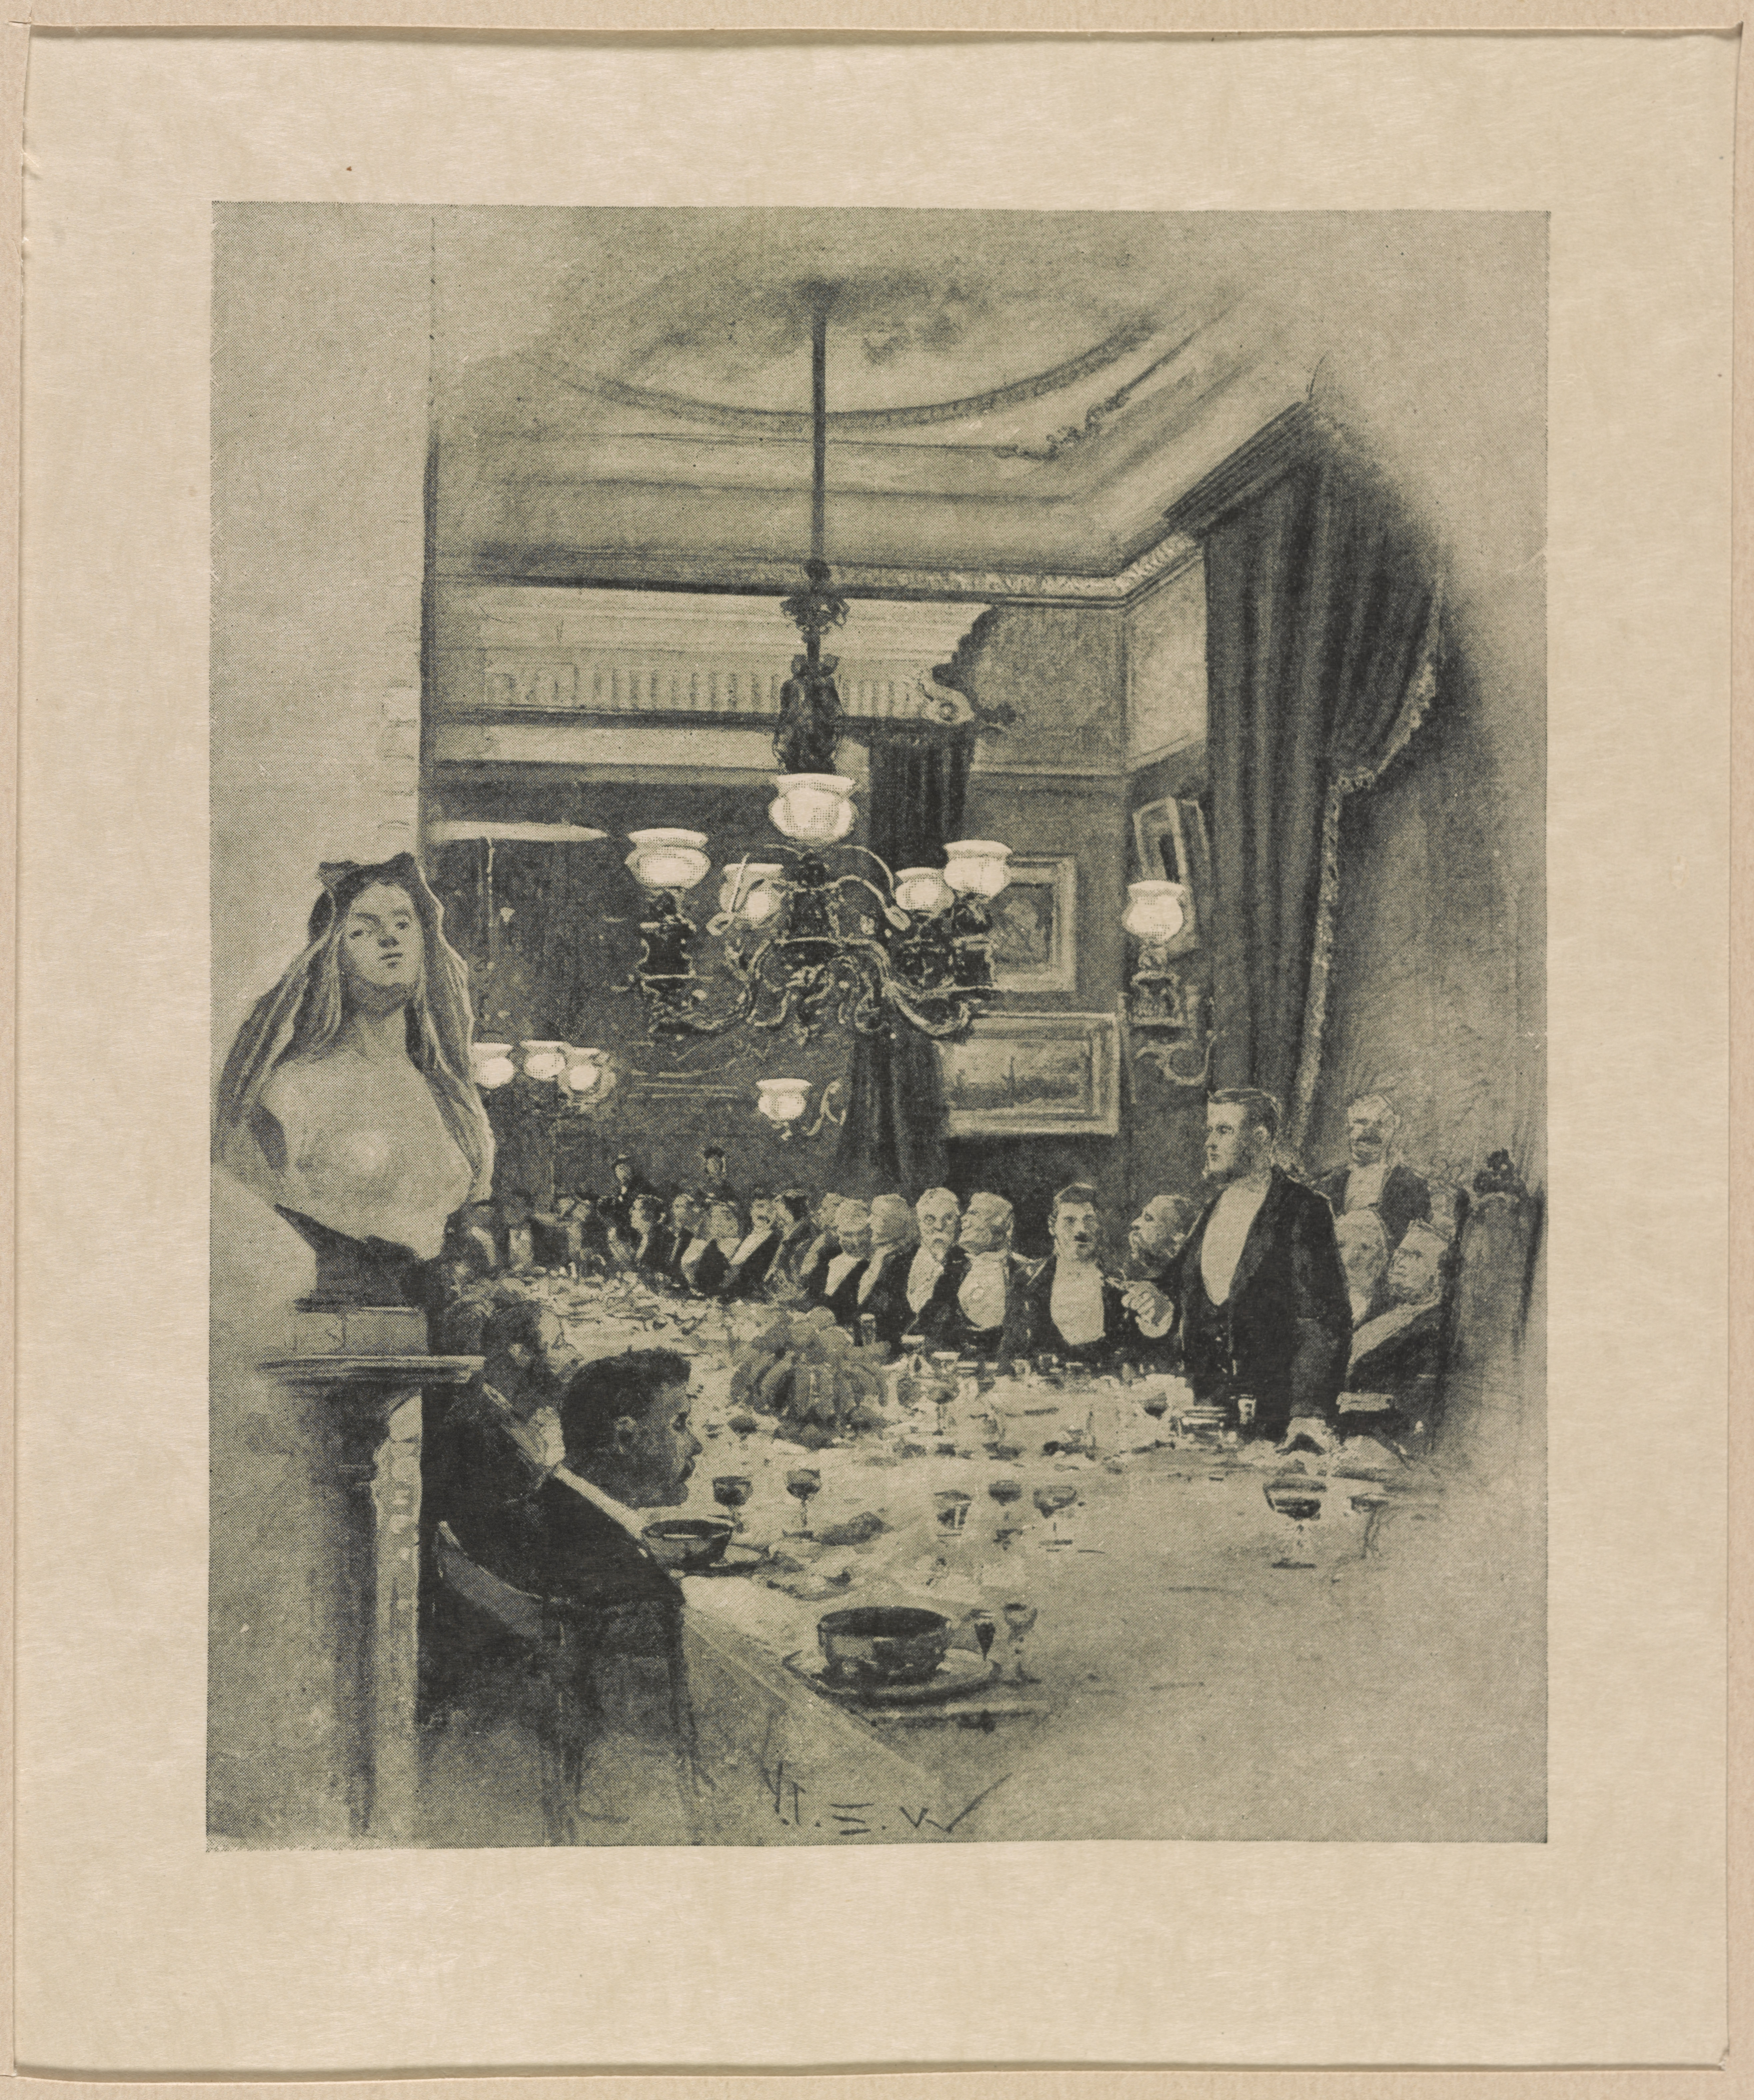 Wright, H. C. Seppings, Men dining at the Lotos Club, 1890. Library of Congress